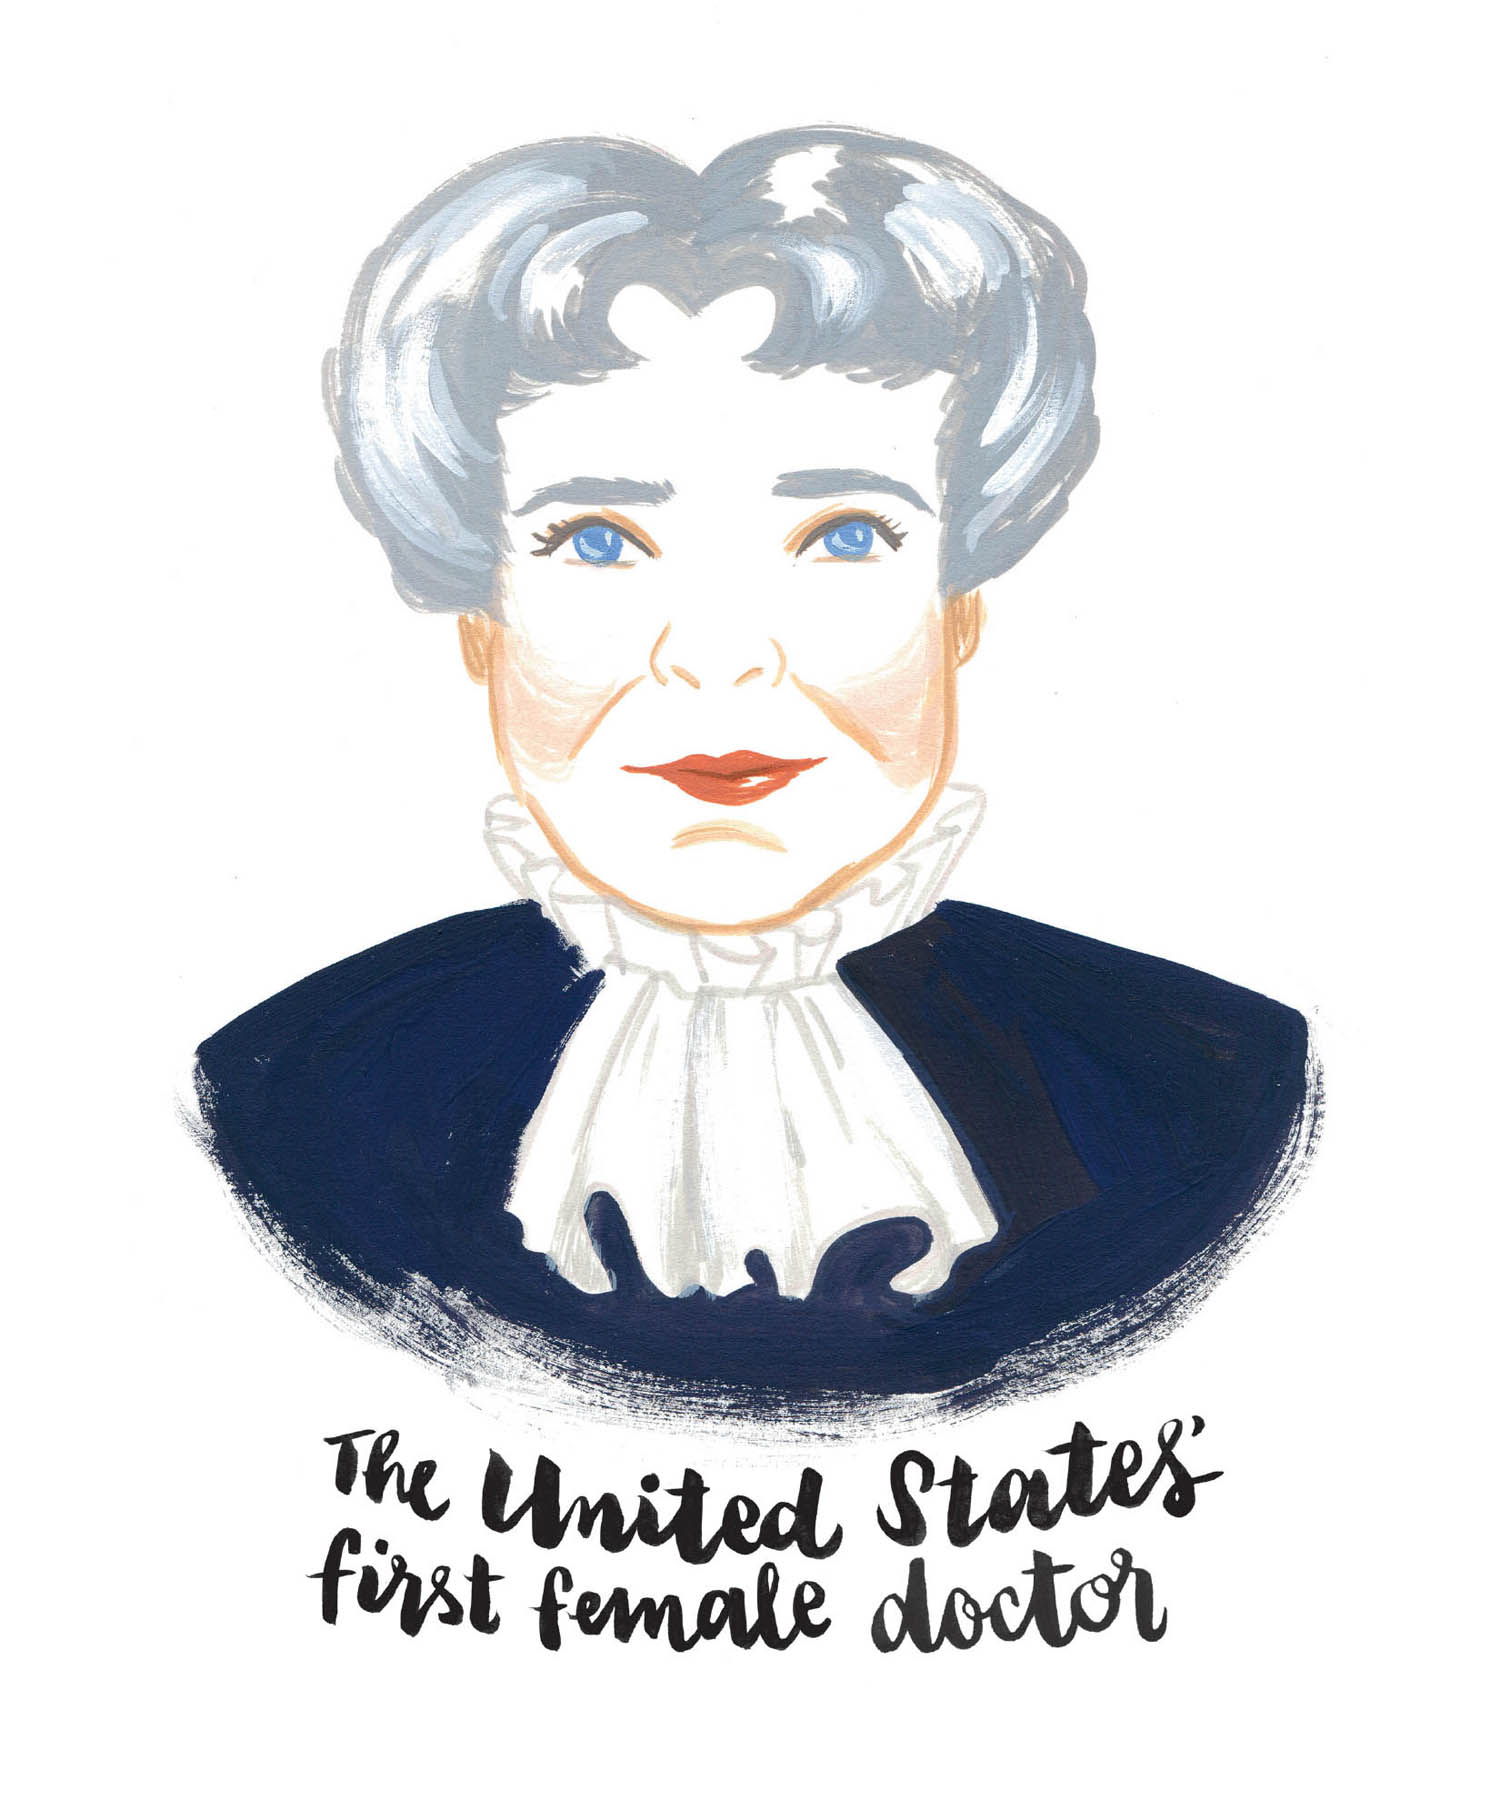 The United States’ first female doctor